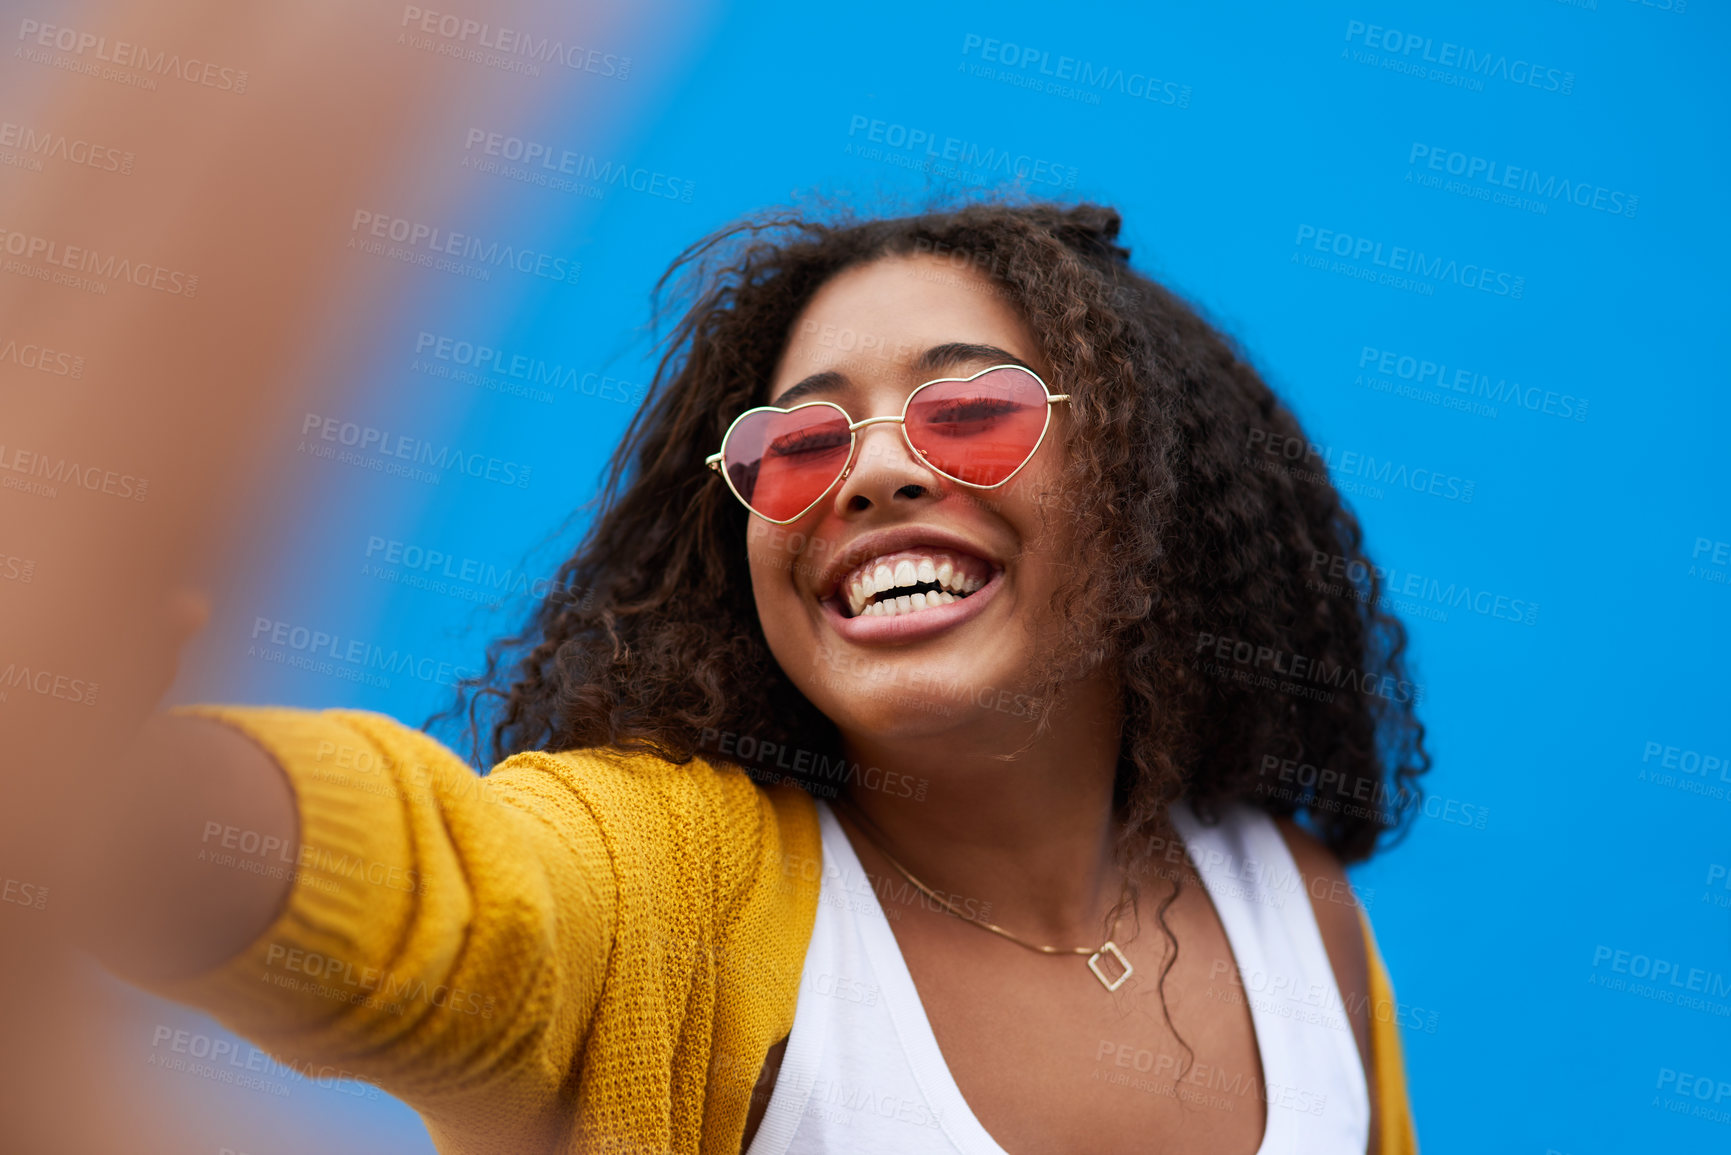 Buy stock photo Cropped portrait of a happy young woman taking a selfie against a blue background